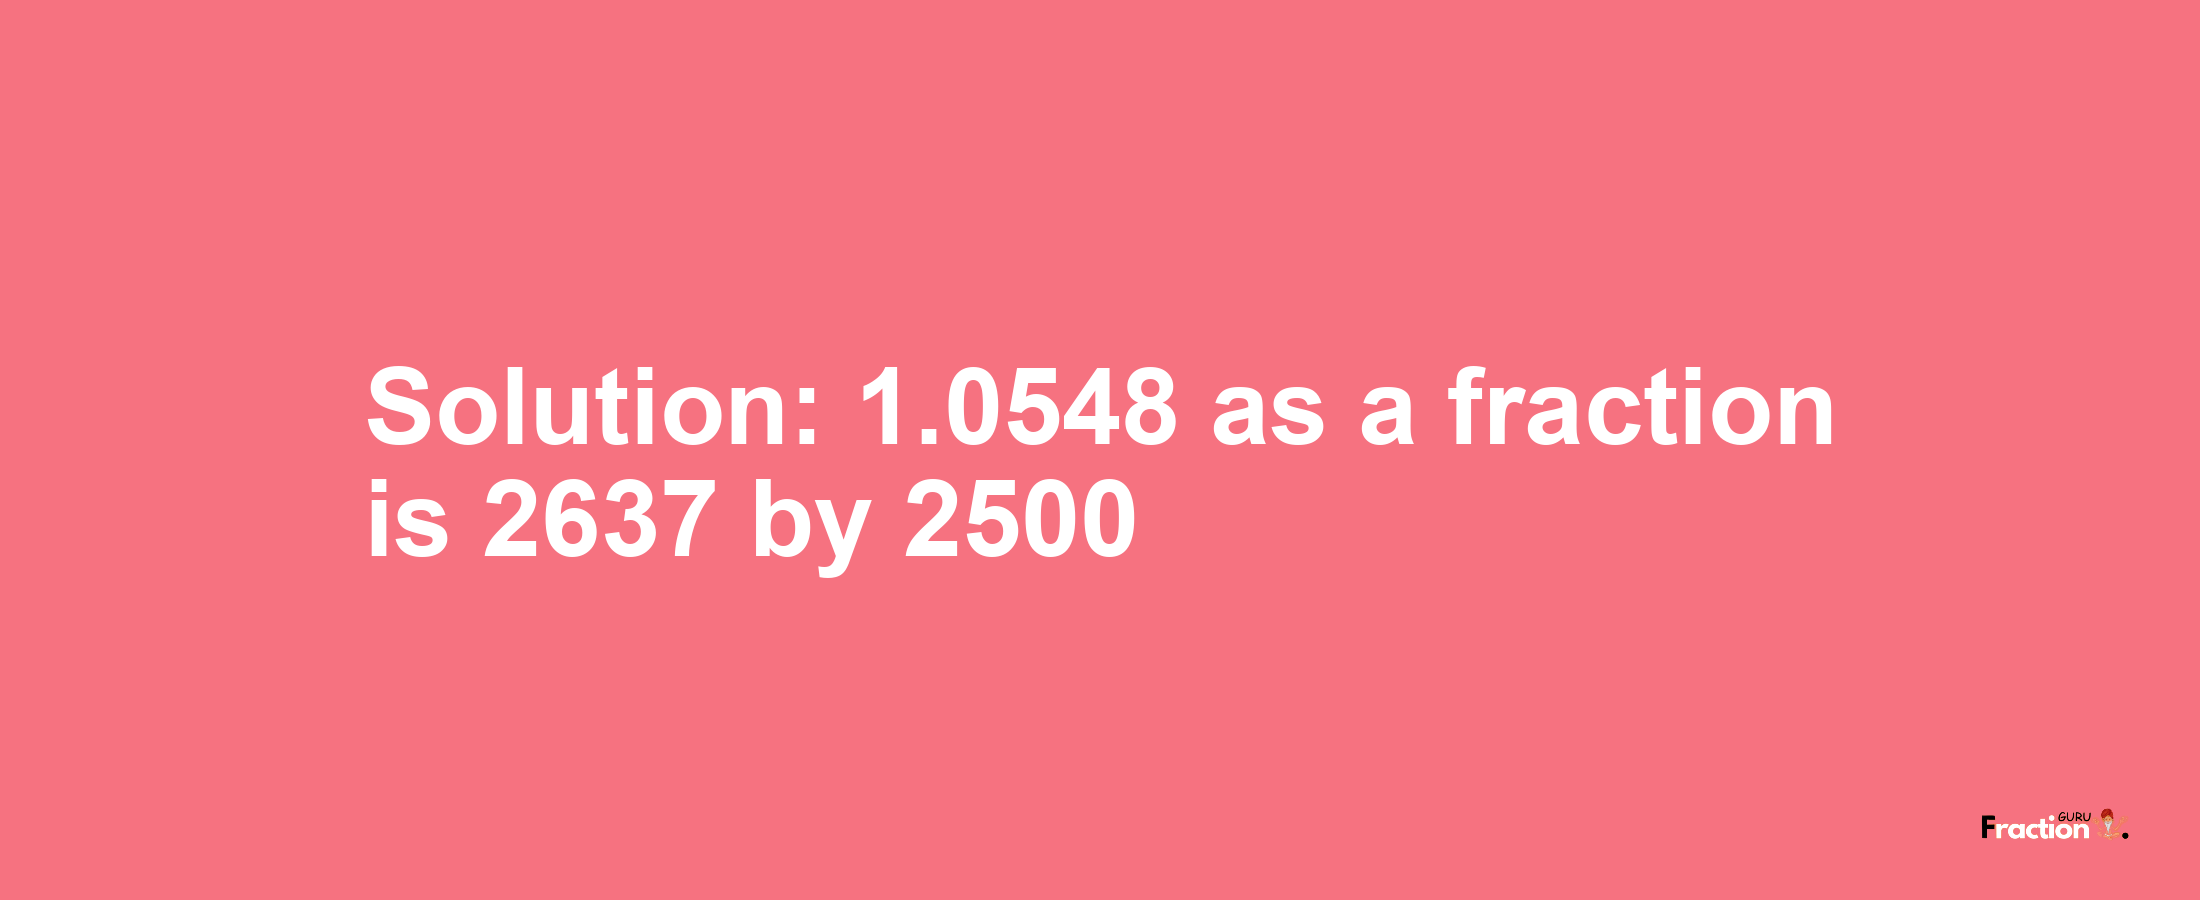 Solution:1.0548 as a fraction is 2637/2500